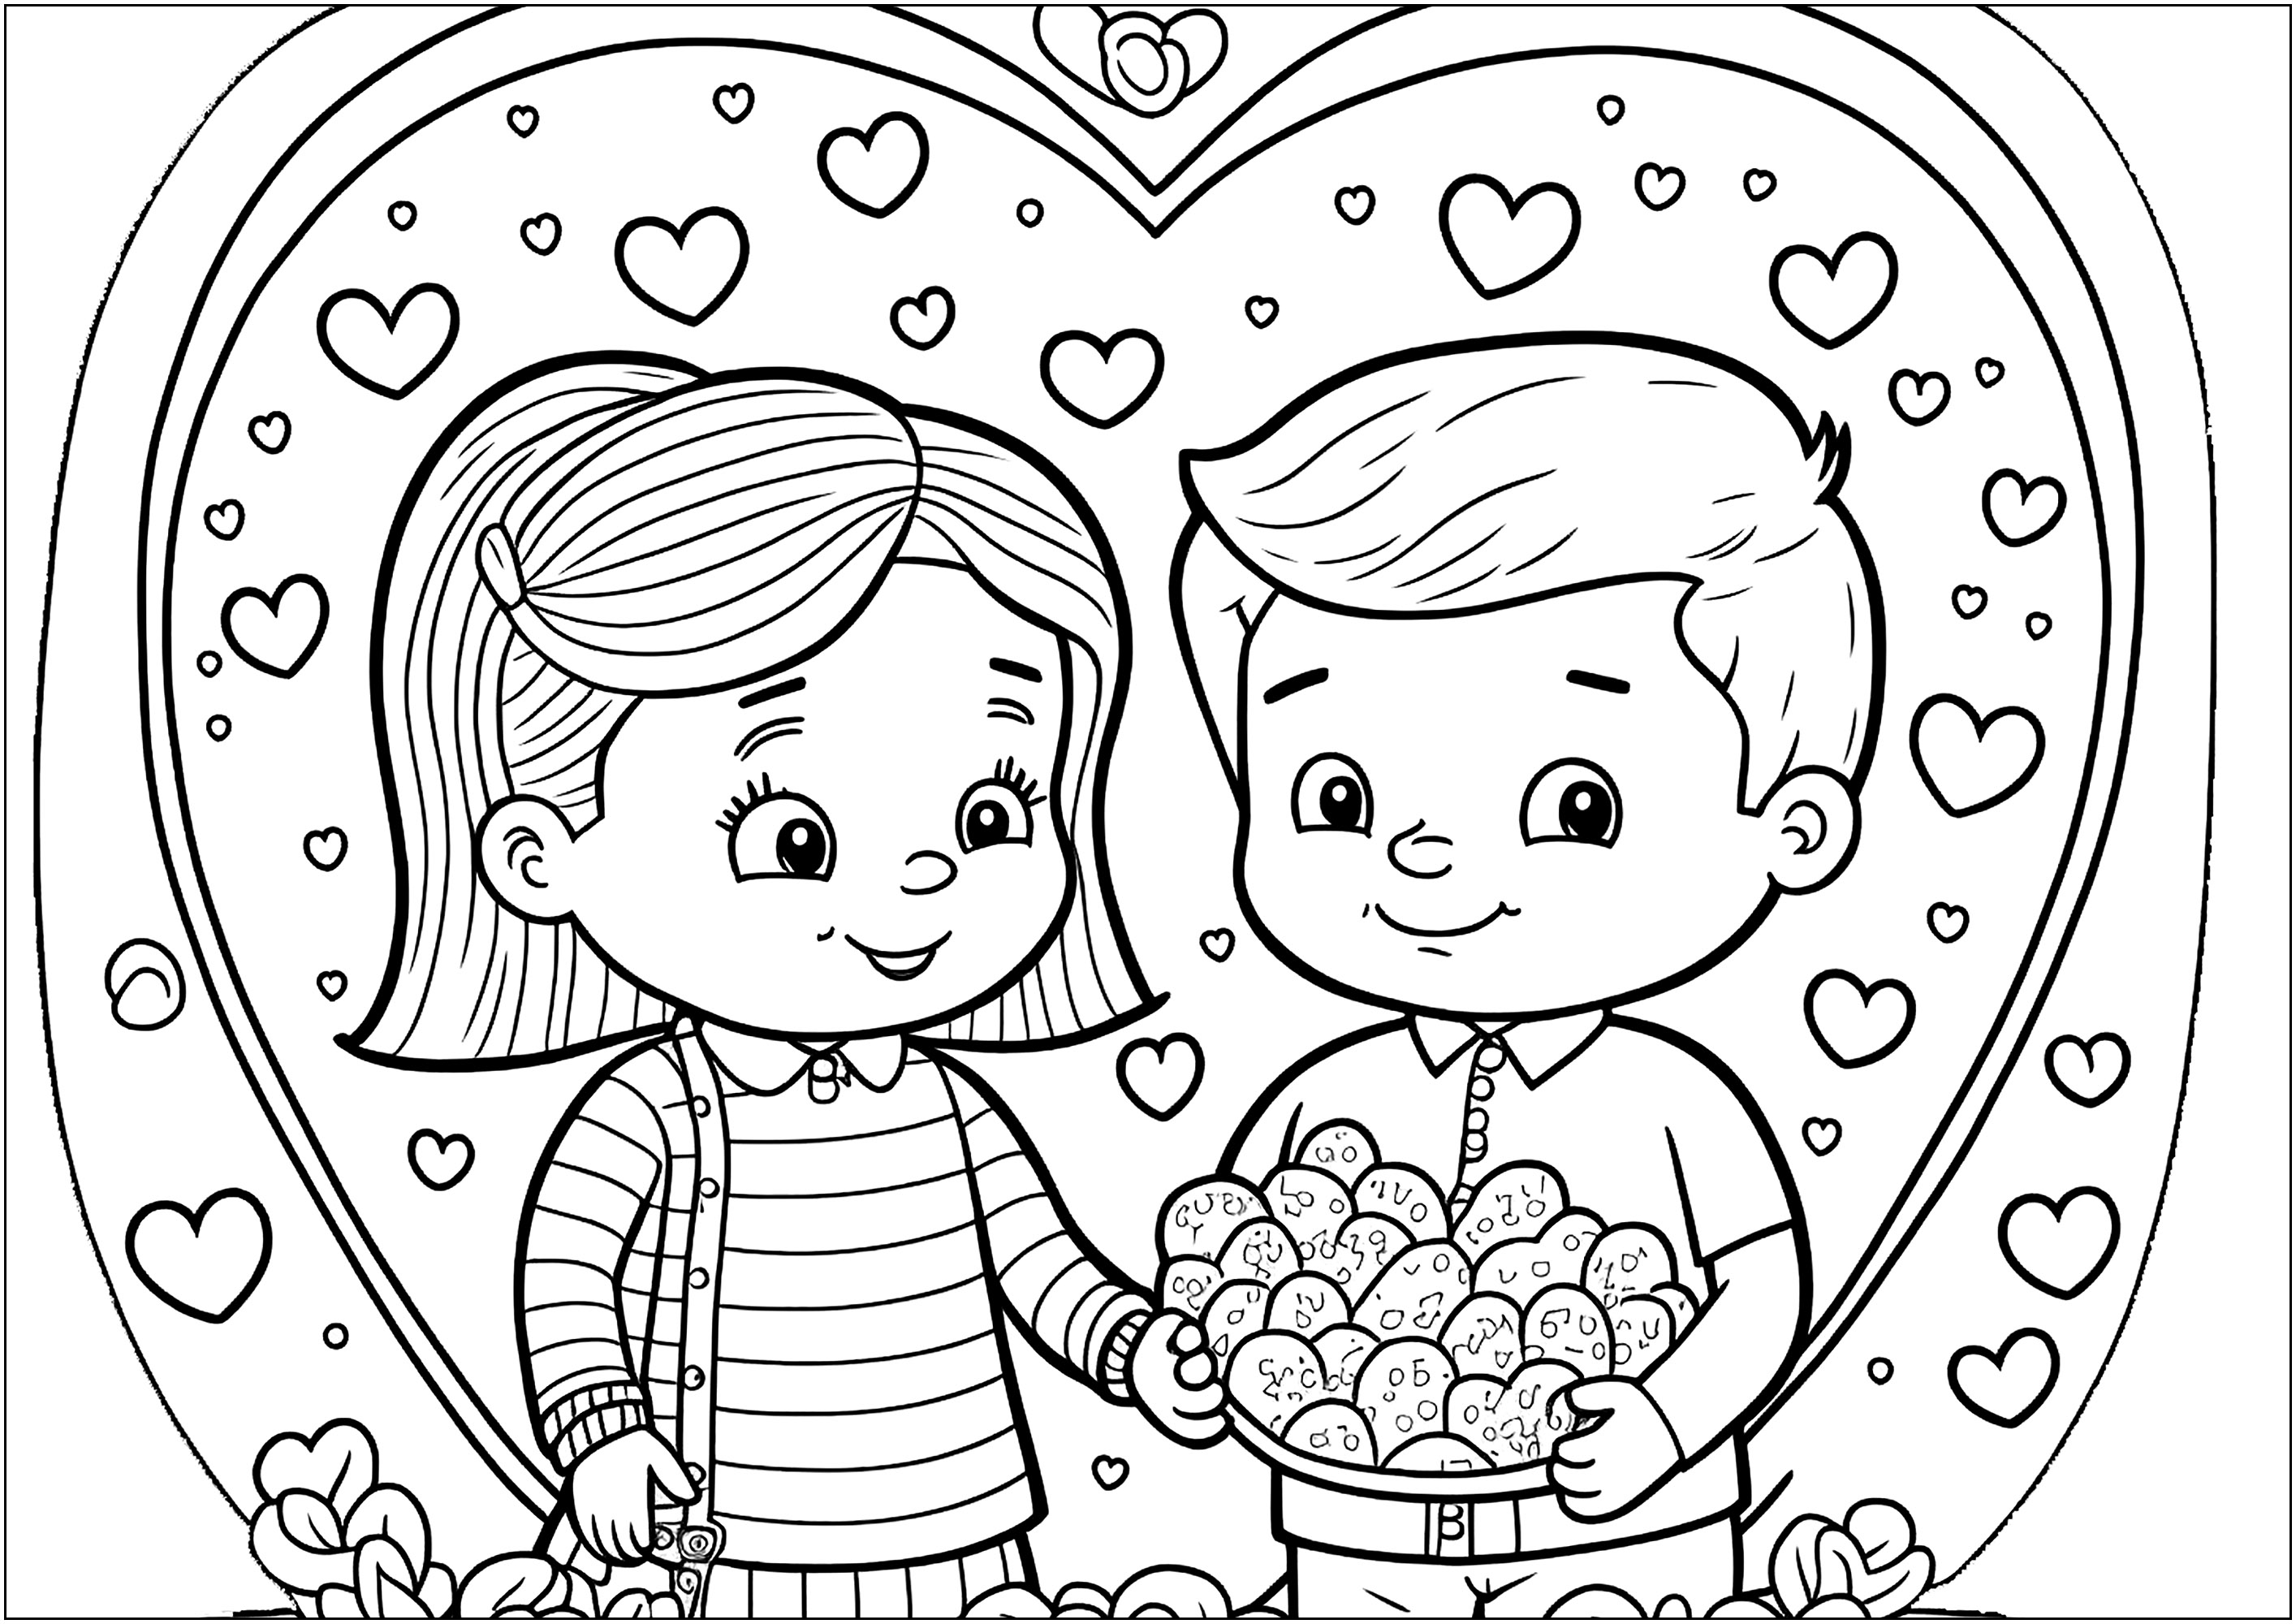 Nice Valentine's Day coloring page. With Easter coming up, this sweet boy gives his sweetheart some eggs!